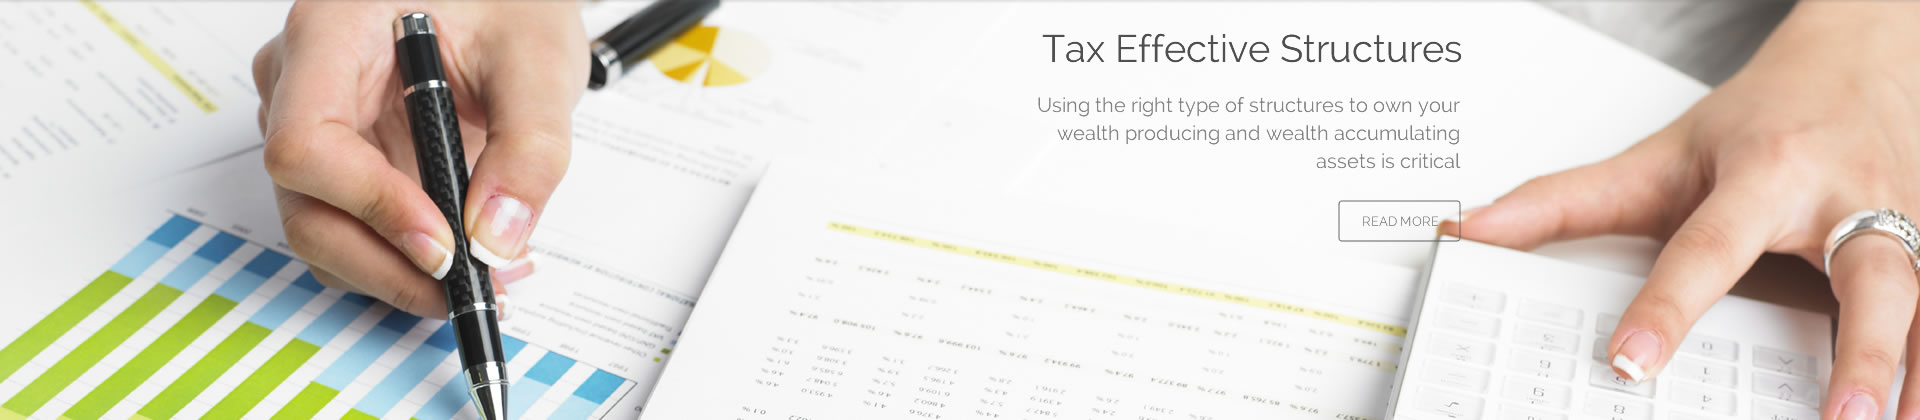 Tax Effective Structures